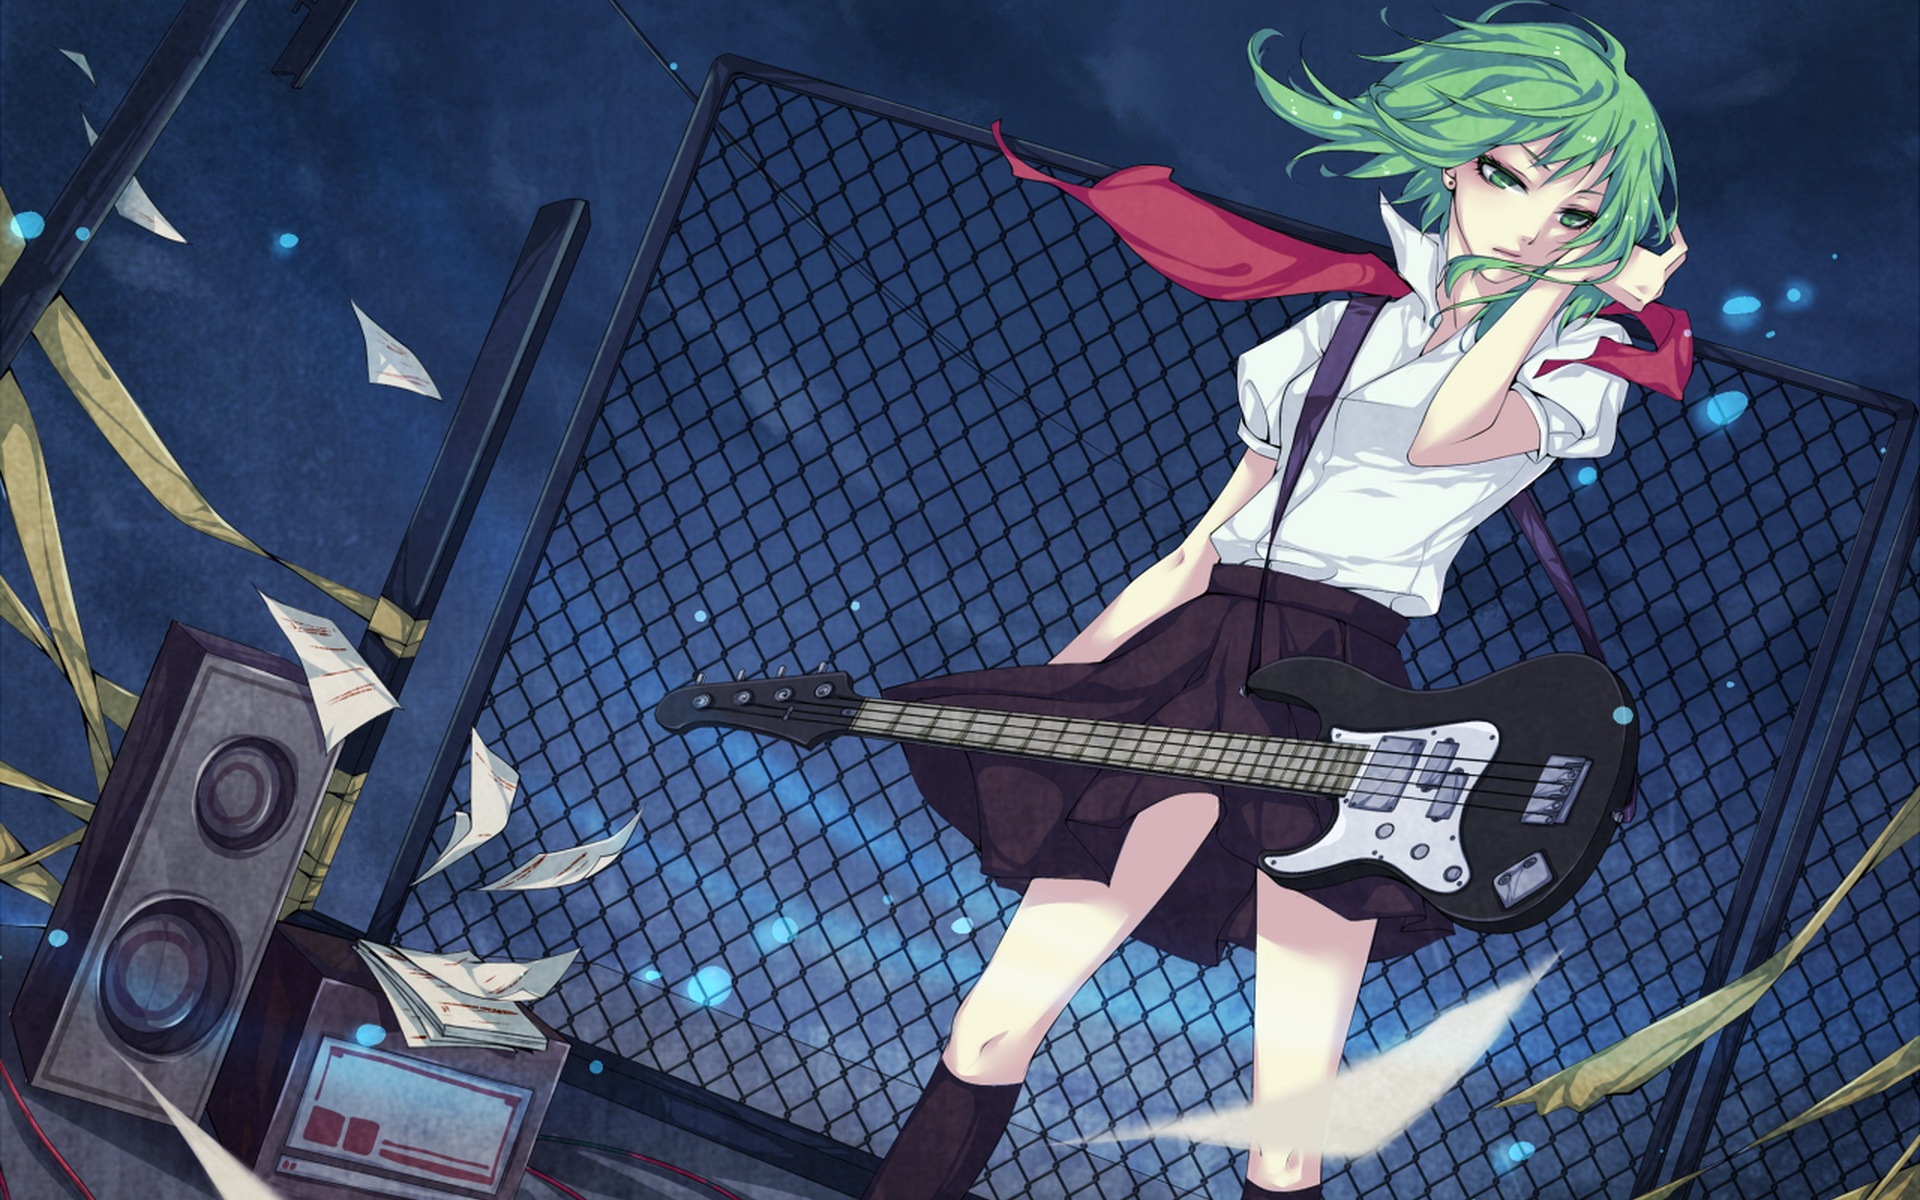 Musique guitare anime girl wallpapers HD #16 - 1920x1200